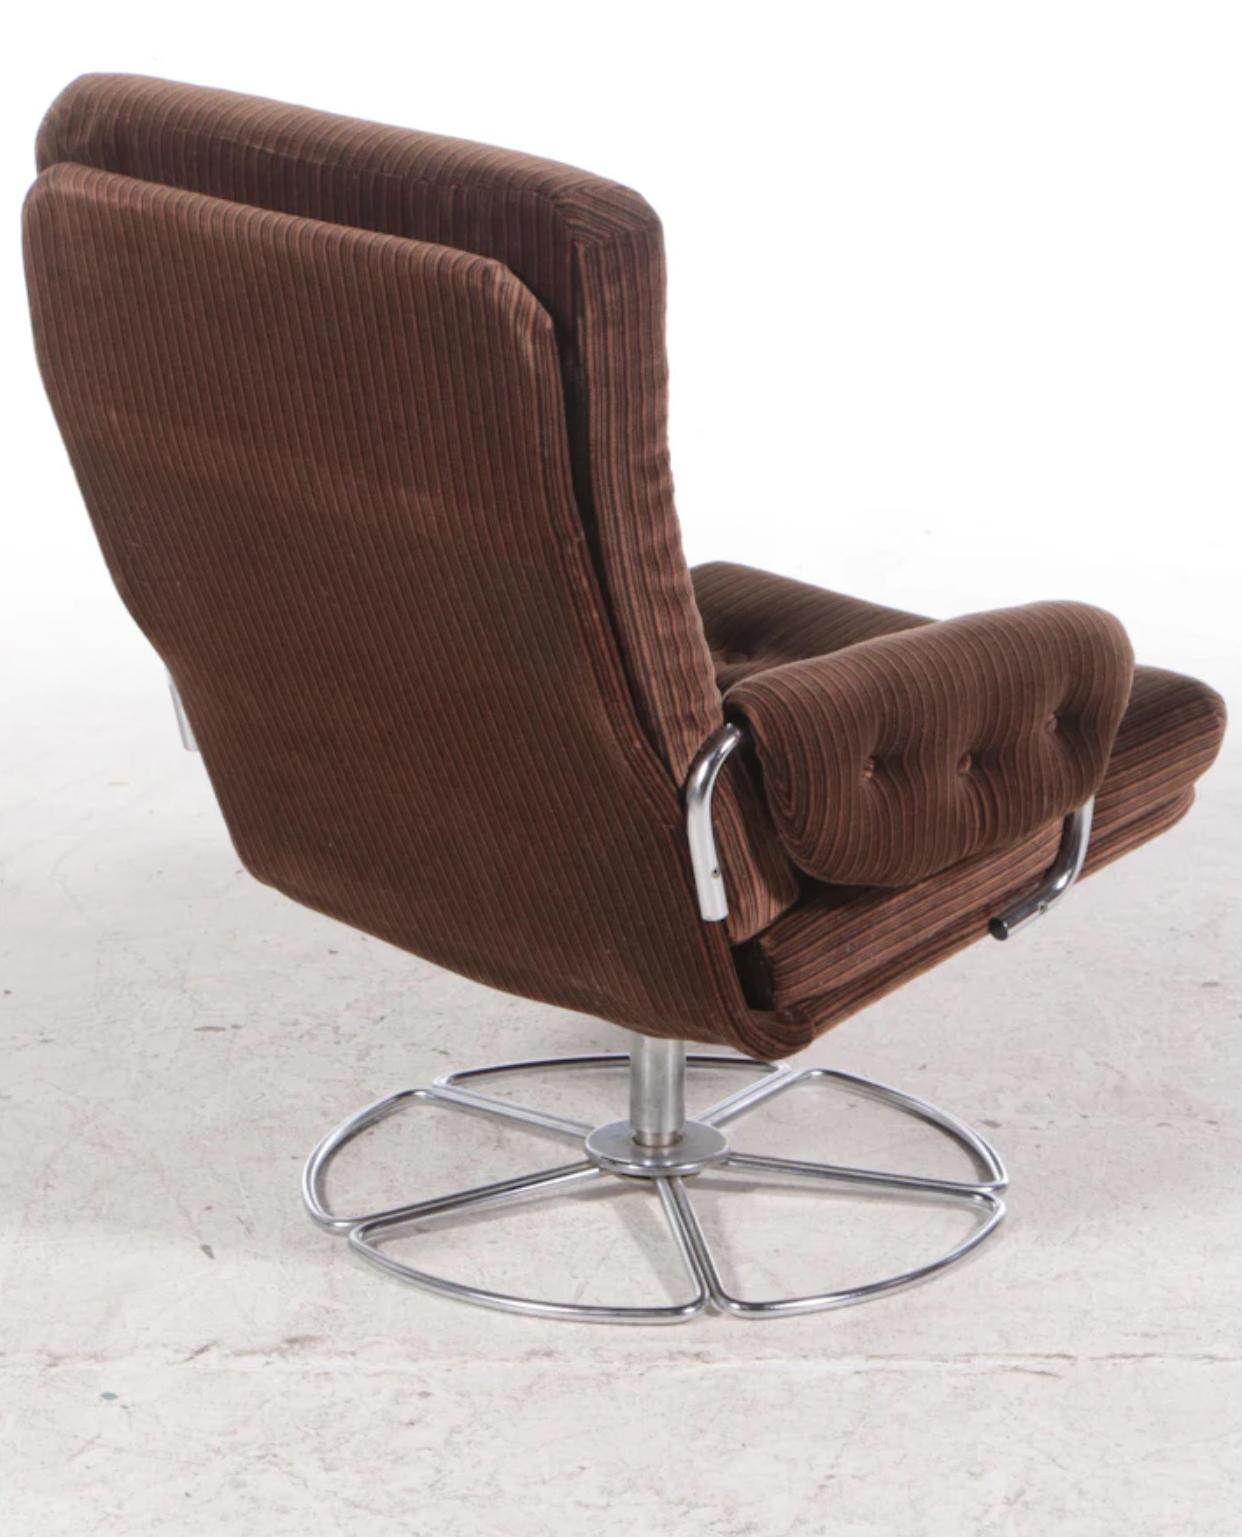 Mid-20th Century Bruno Mathsson for Dux Chrome Based Swivel Lounge Chair. 2 of 2 For Sale